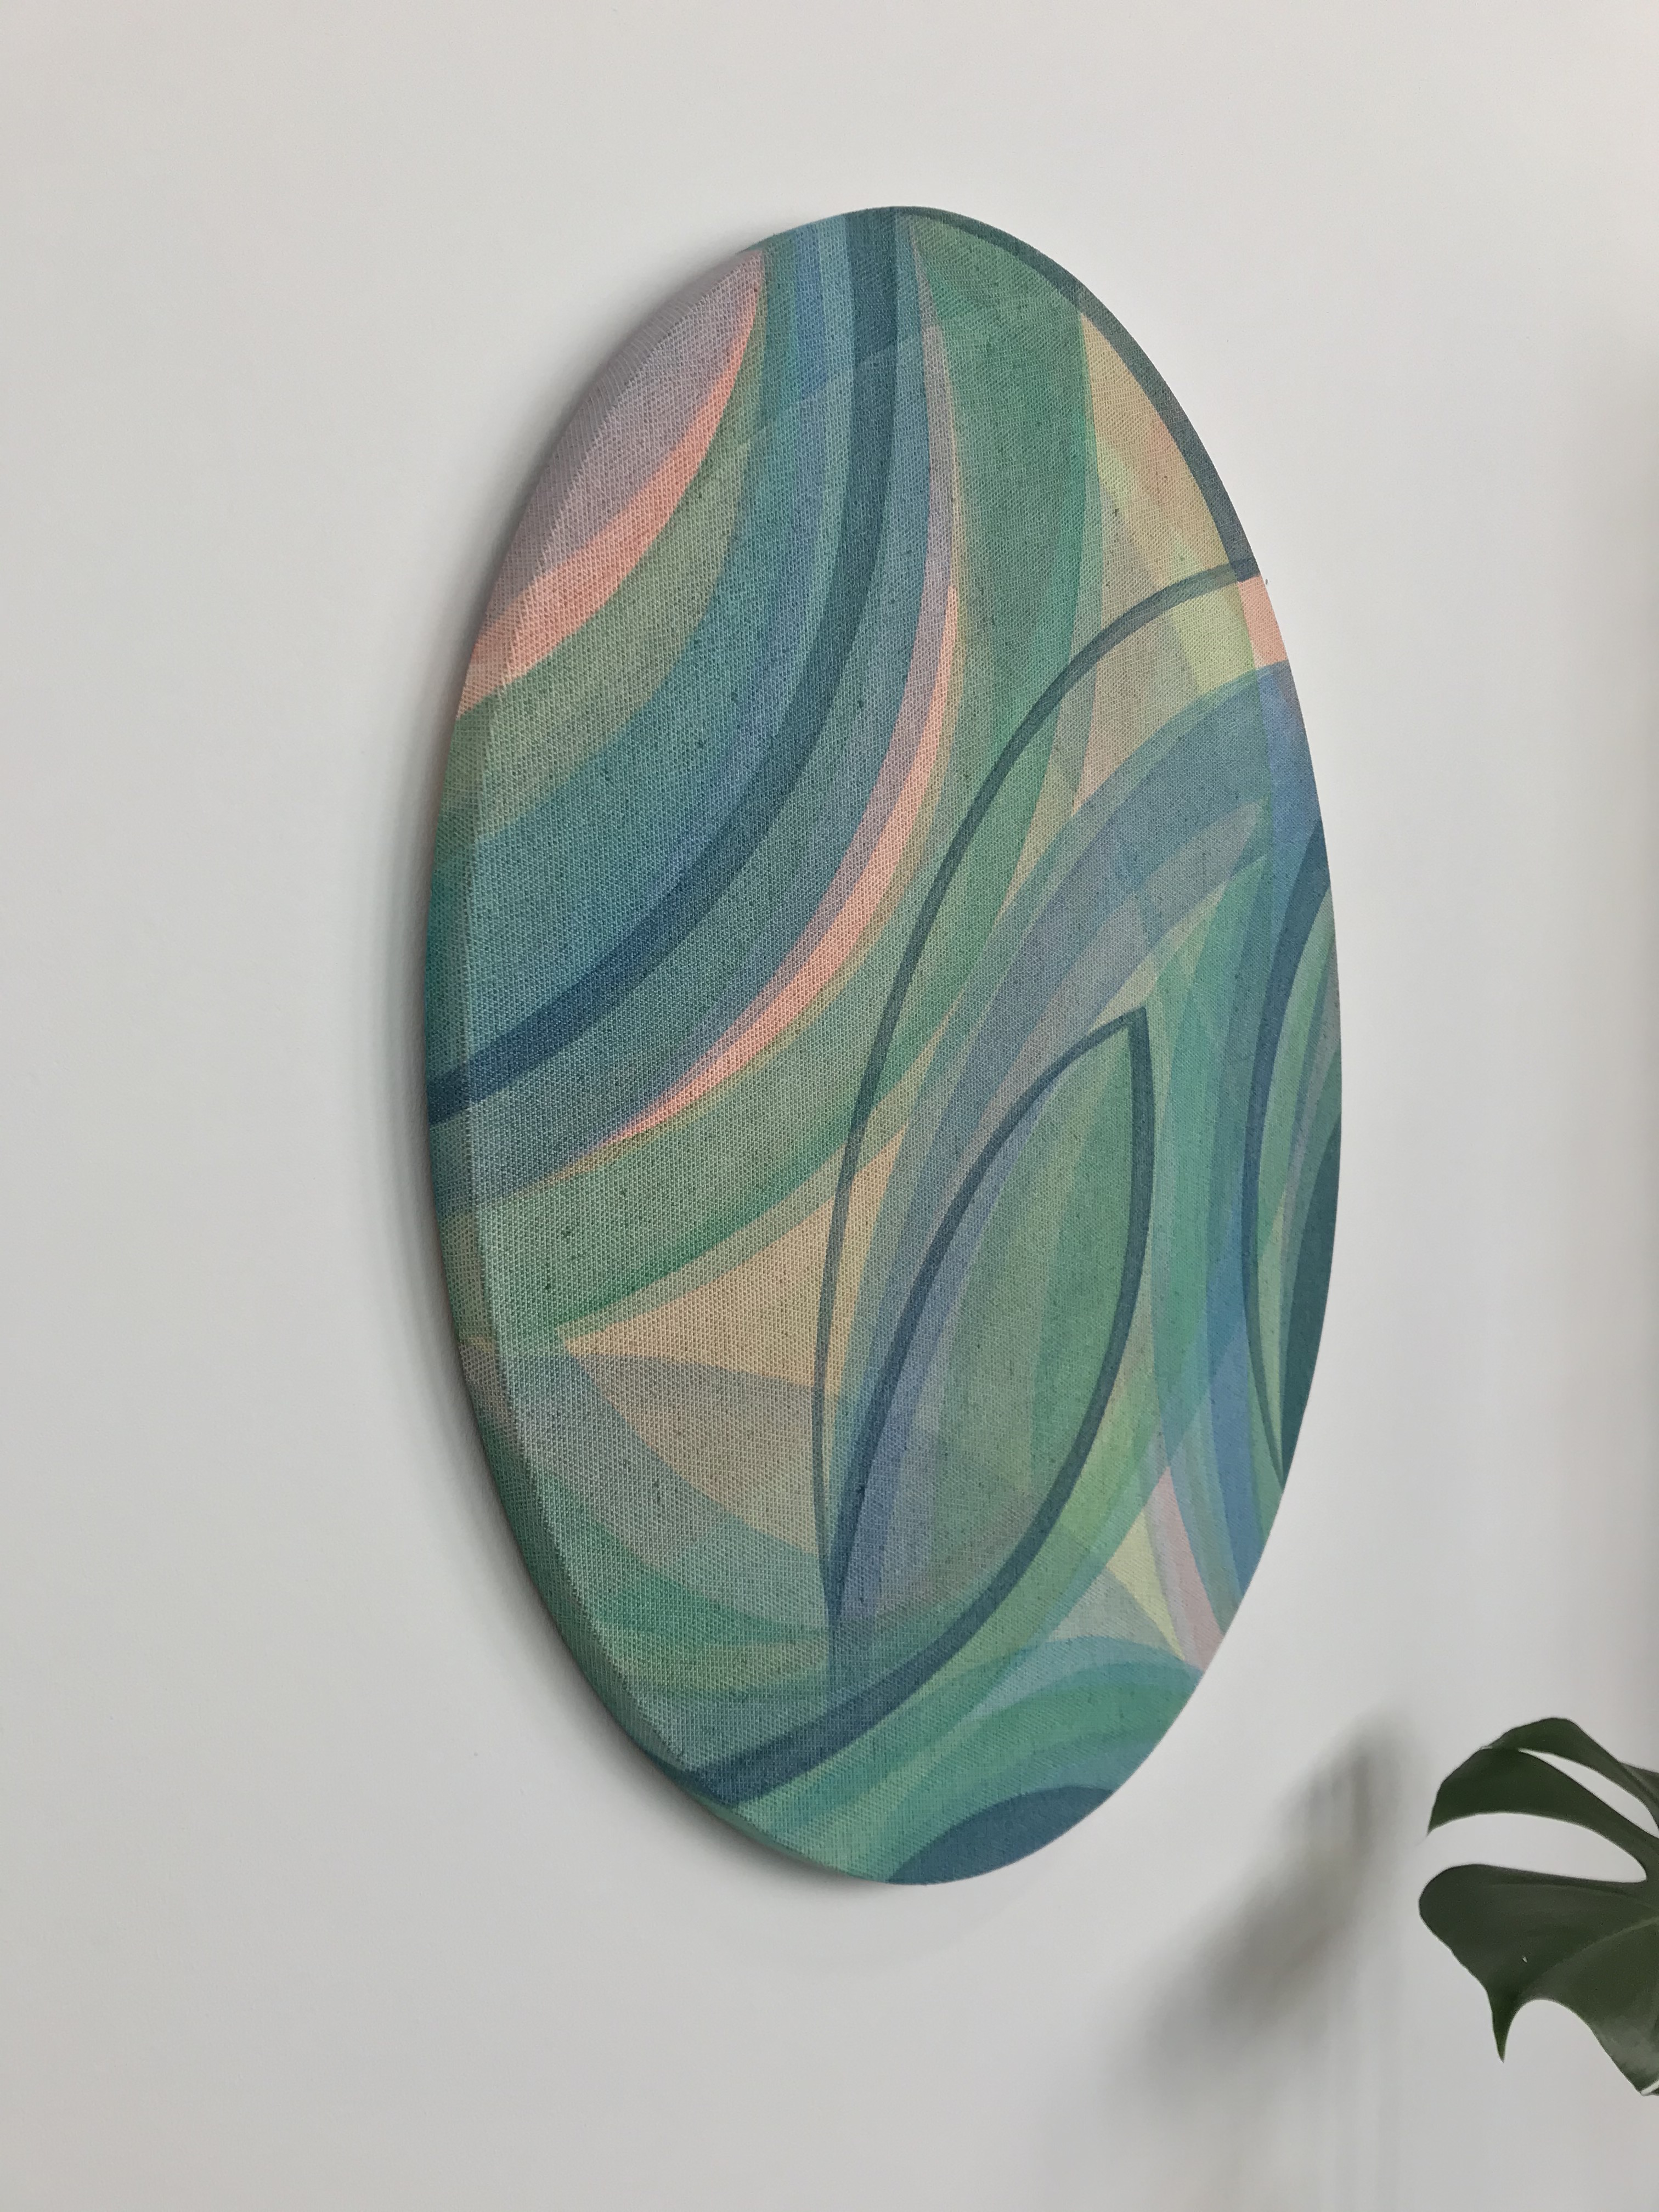 Yelena Popova, Green Oval (from Sun Paths Series), The Auction Collective